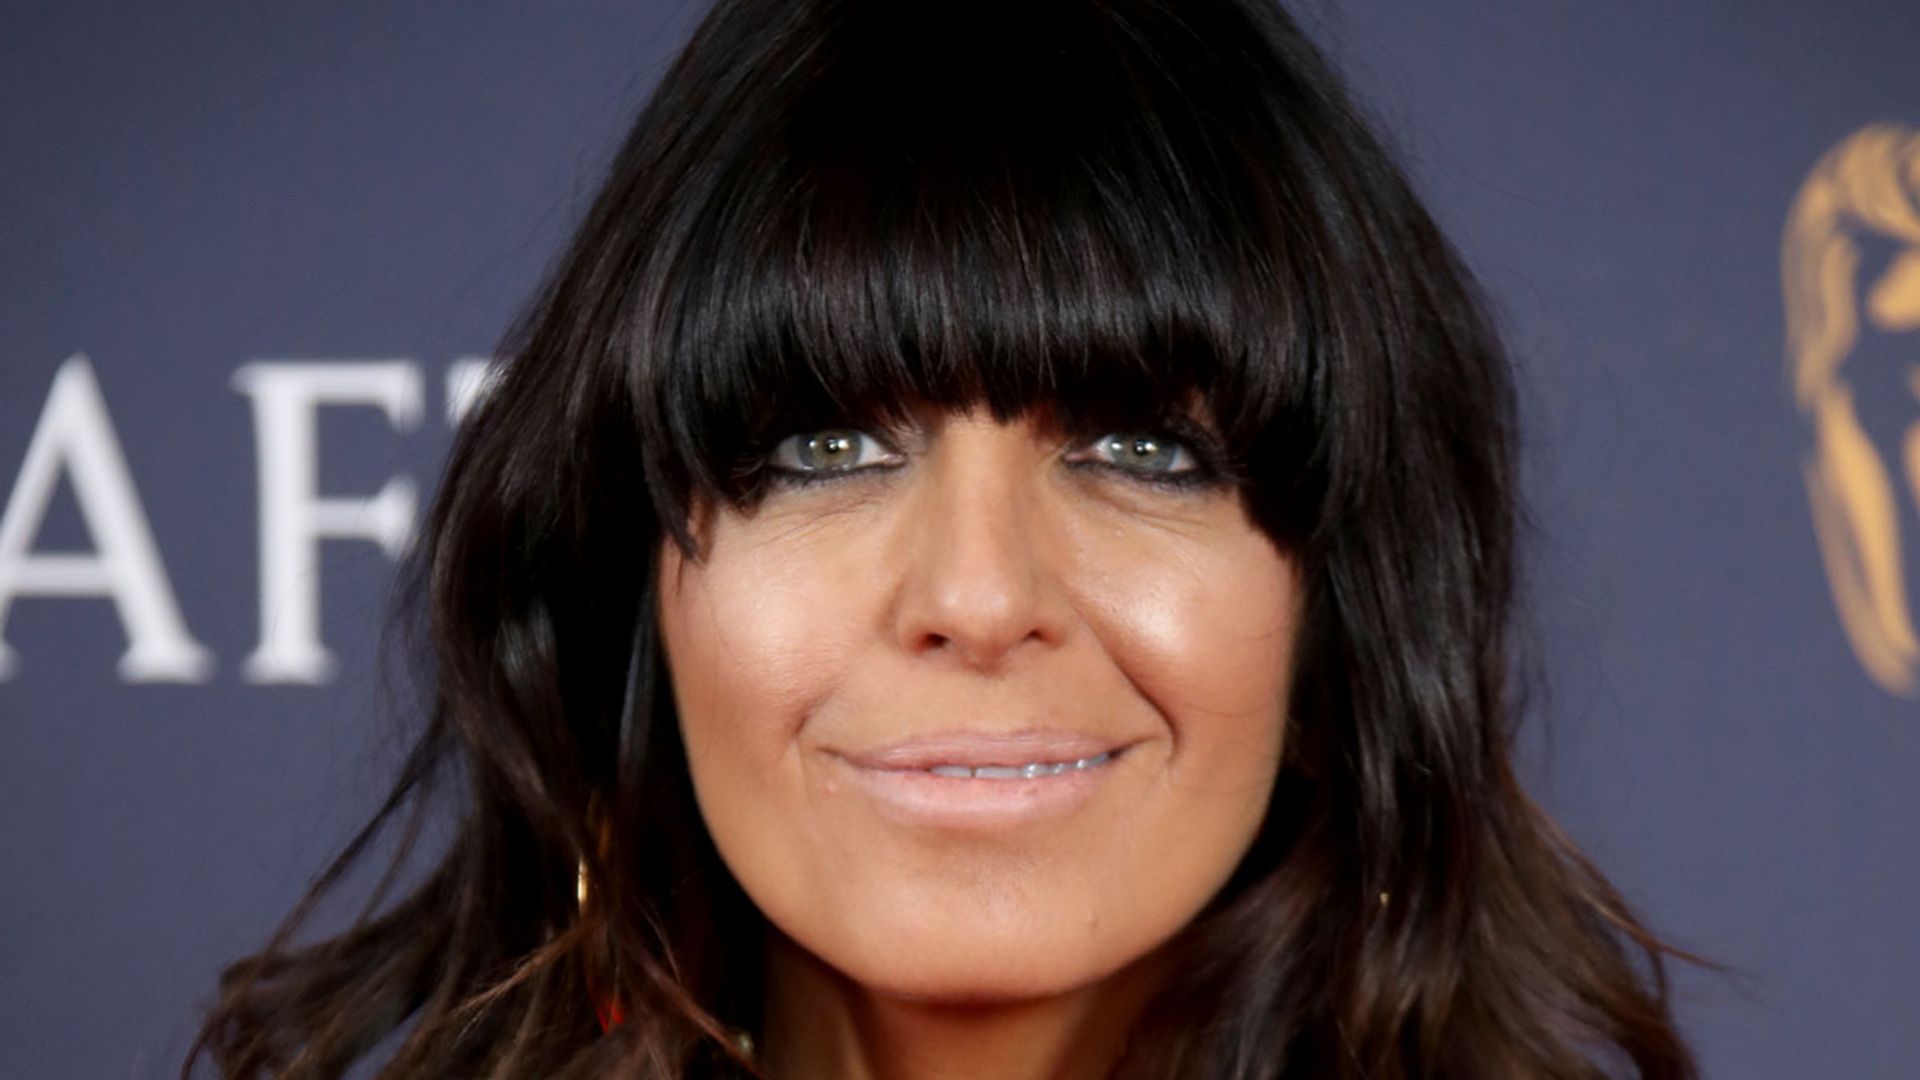 Claudia Winkleman wore a £29.99 Zara playsuit on the Strictly results show, and we're still not over it